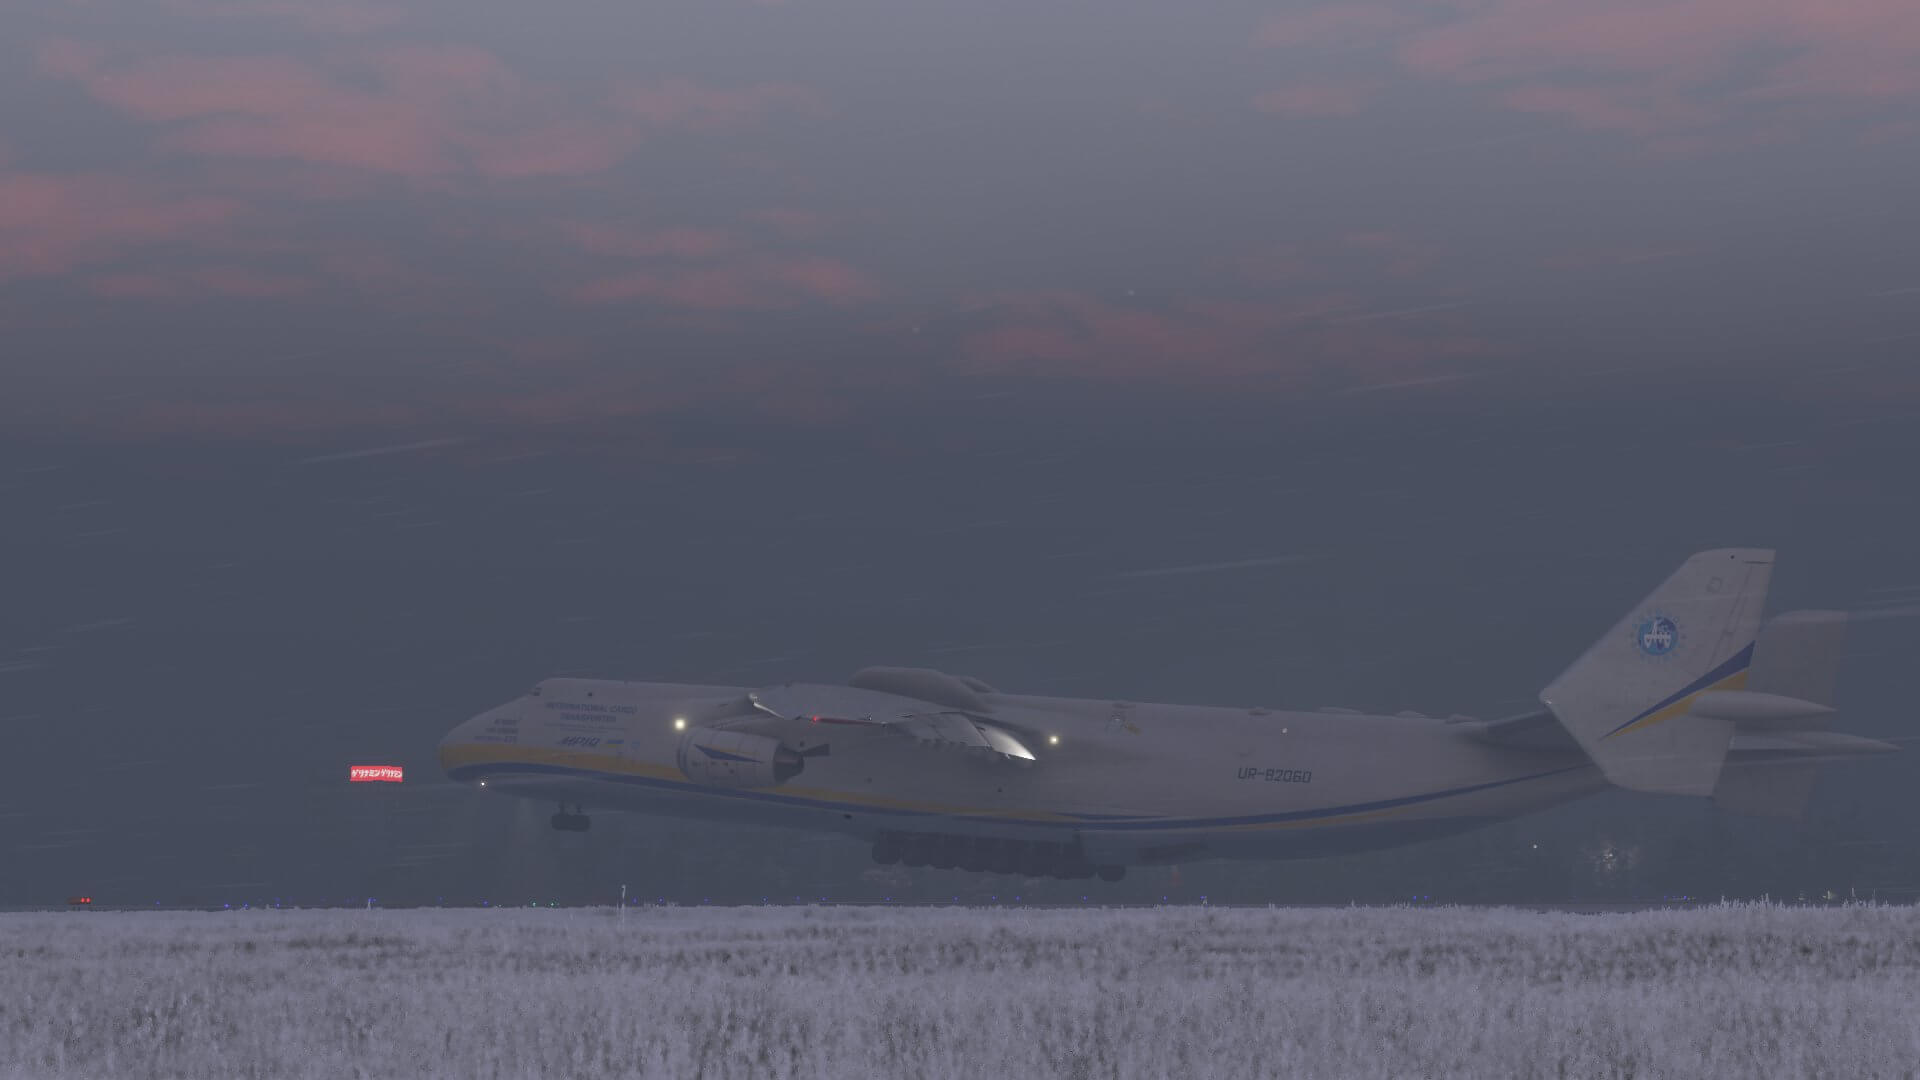 The Antonov AN-225 comes in for a snowy landing.